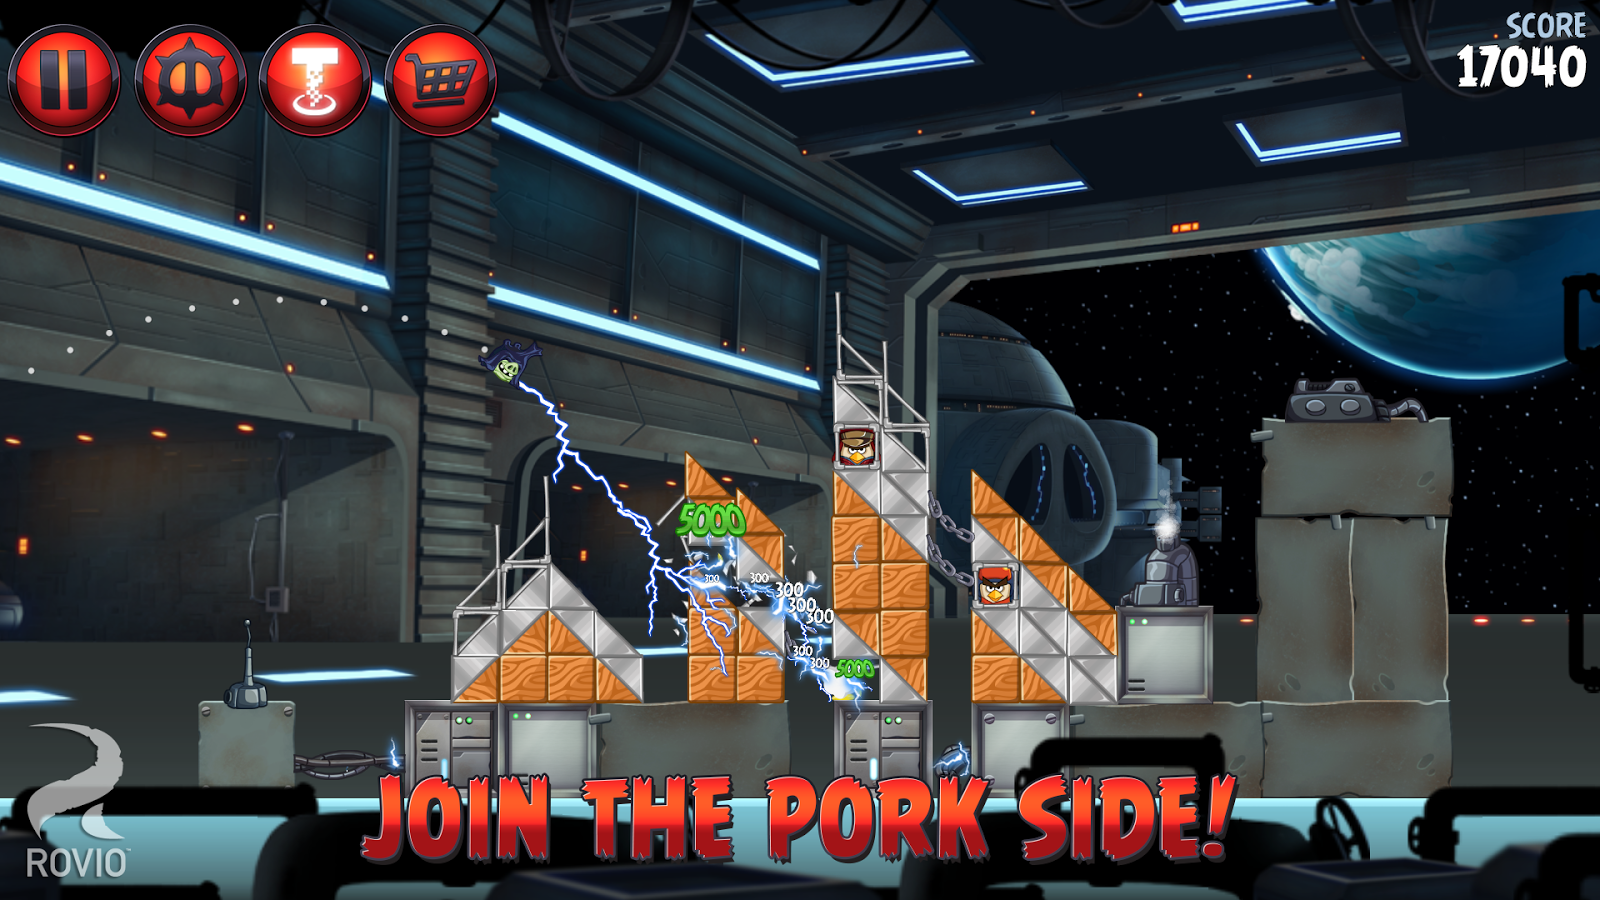  Angry Birds Star Wars II disponibile per iOS e Android e WP8 !!